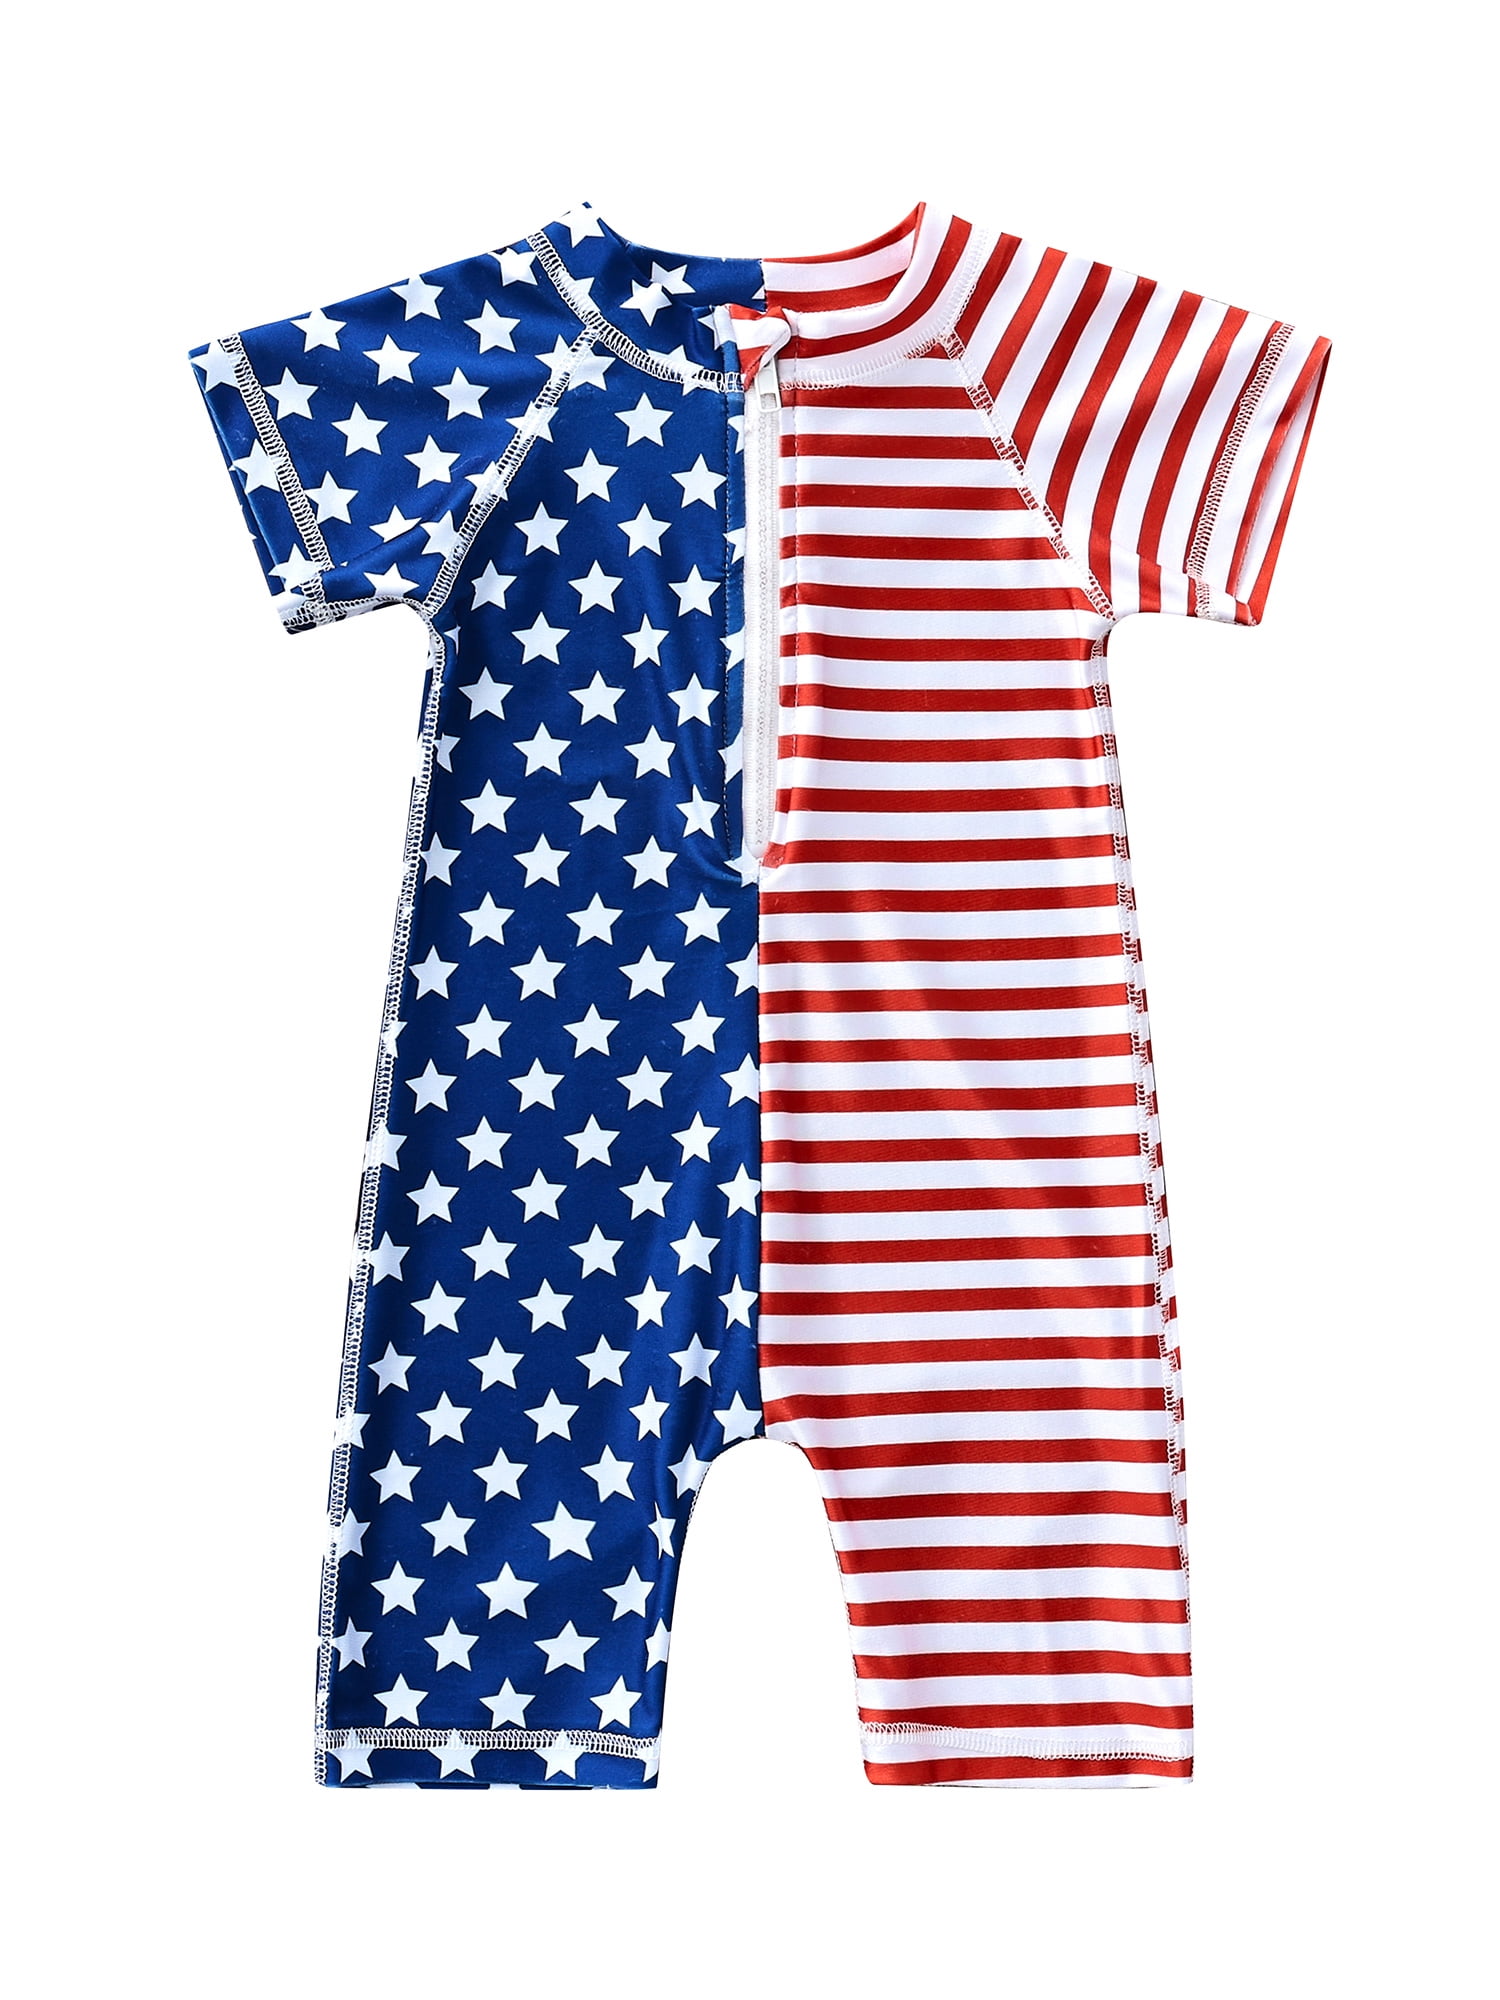 New My First 4th of JULY Baby American Merica Romper One Piece Suit Shower 